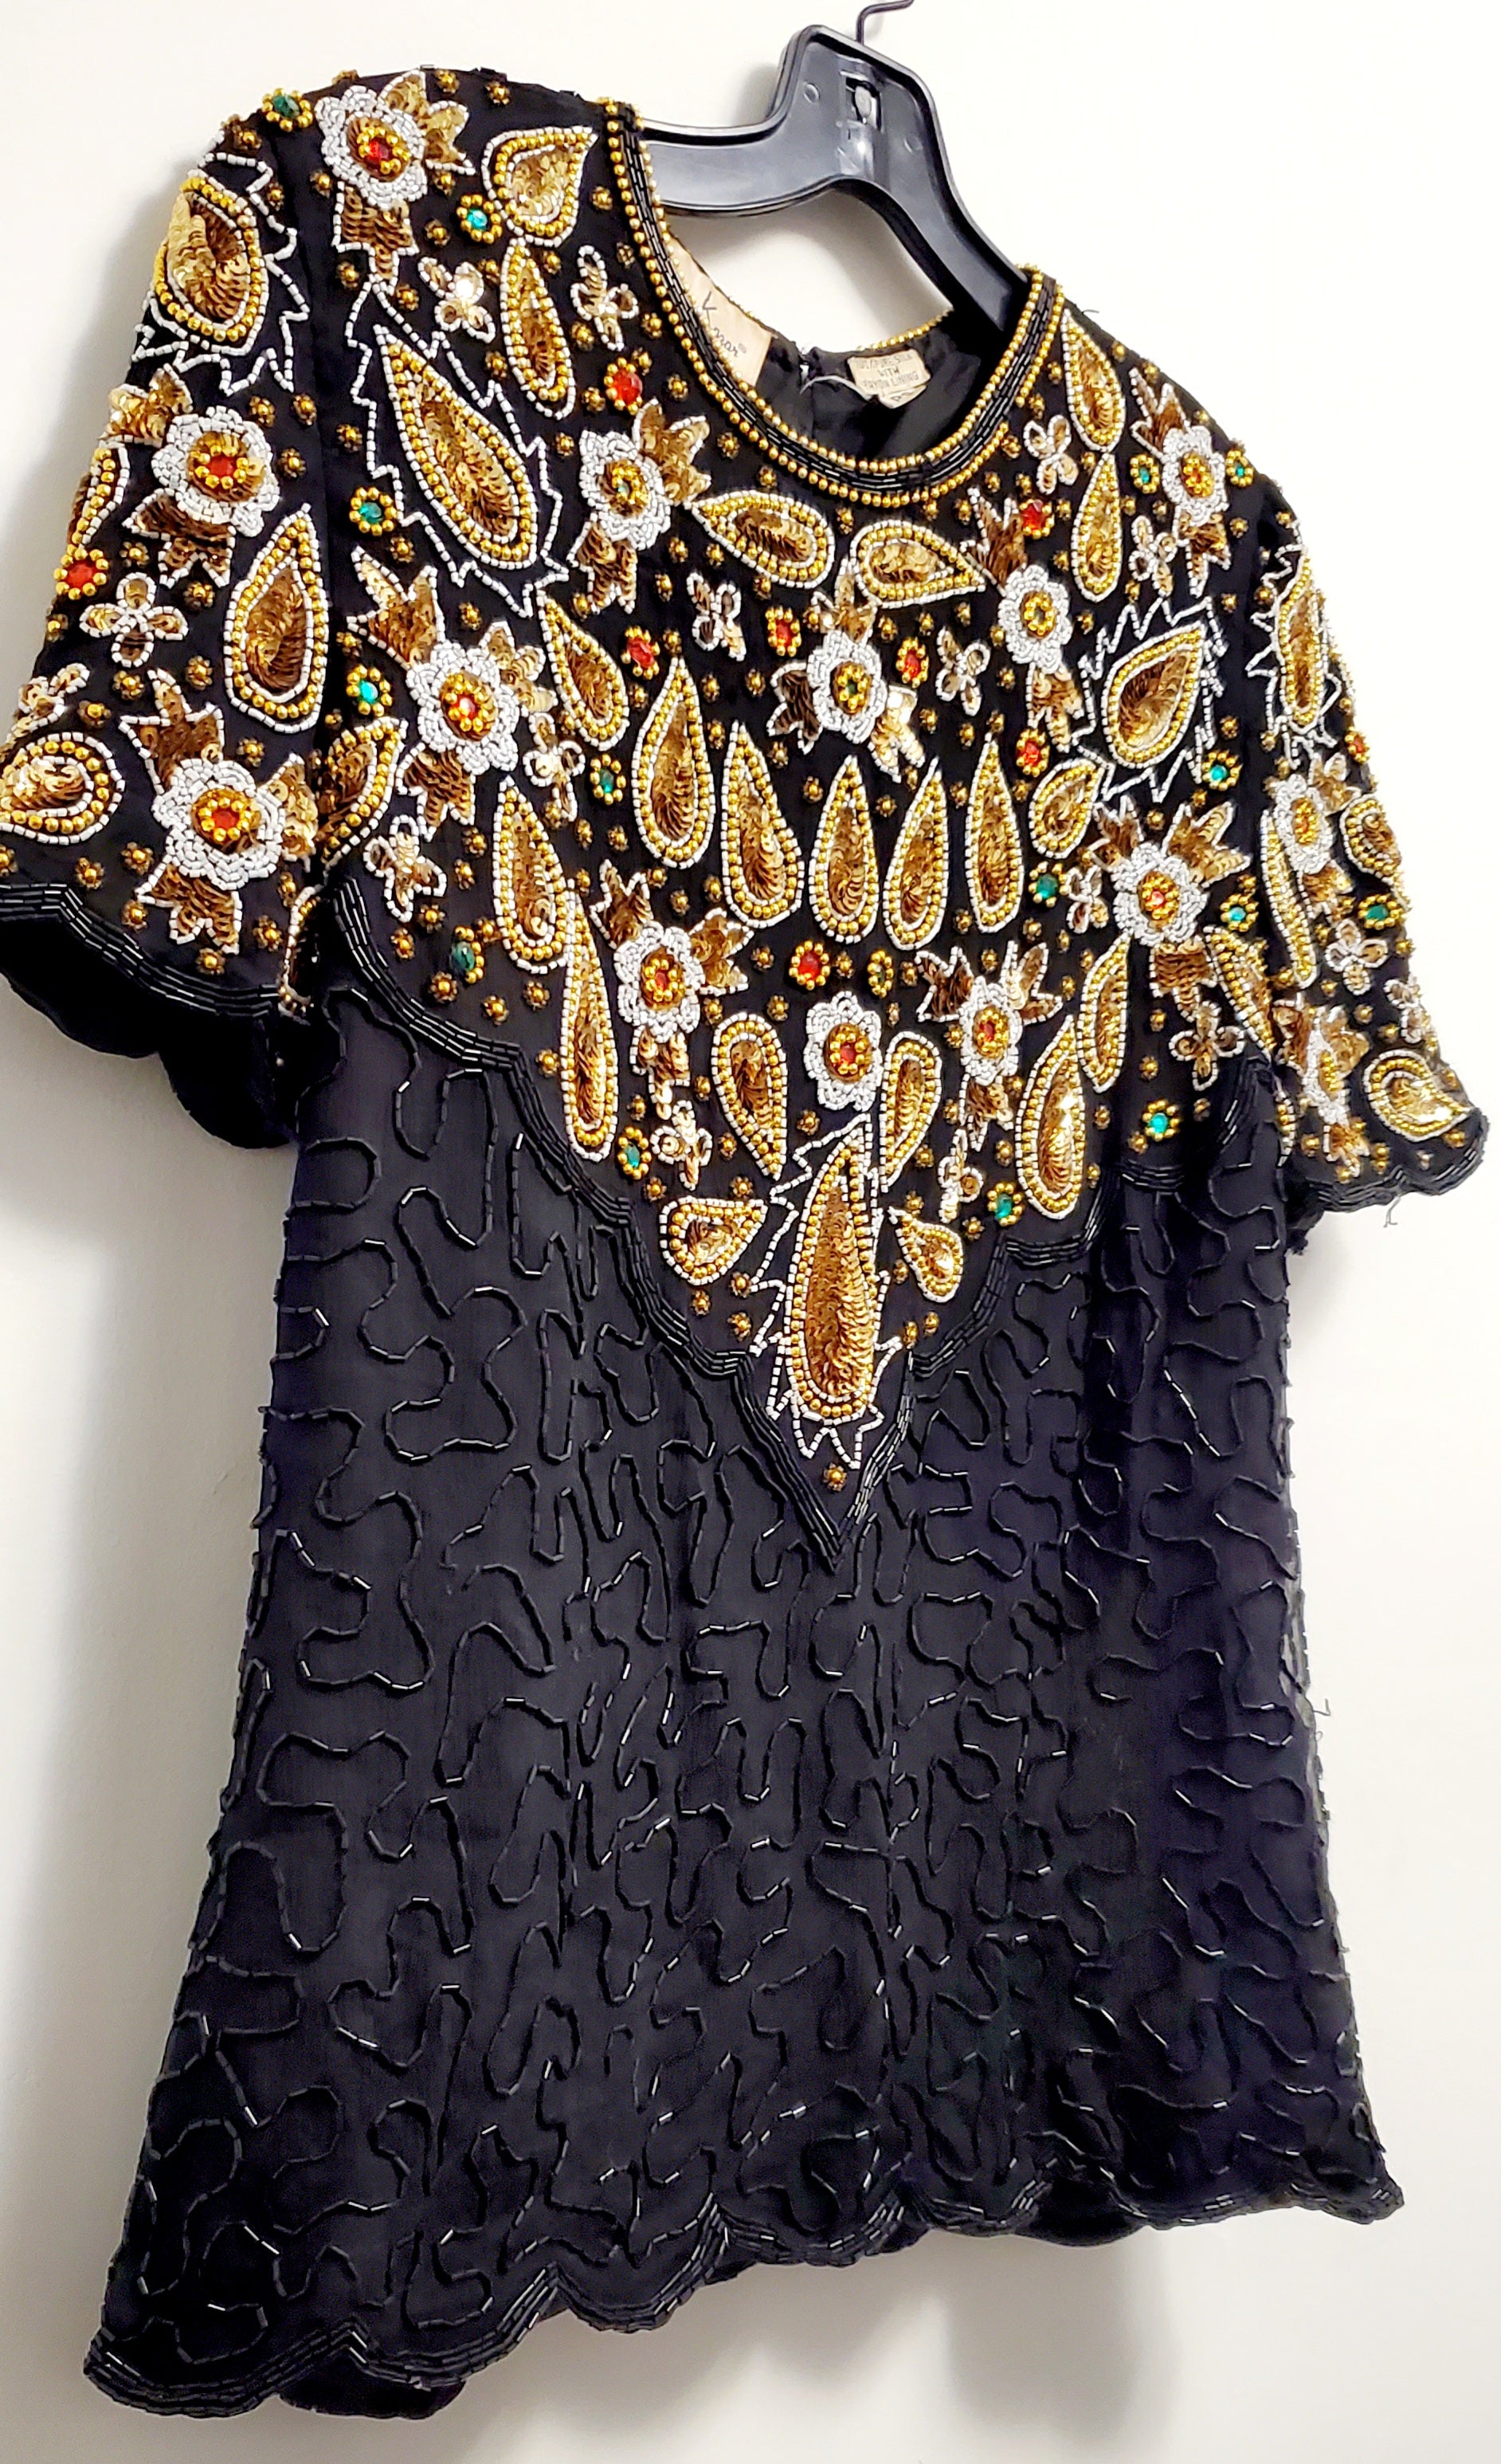 BEJEWELLED-80s Black and gold paisley rhinestone, bead and sequin top